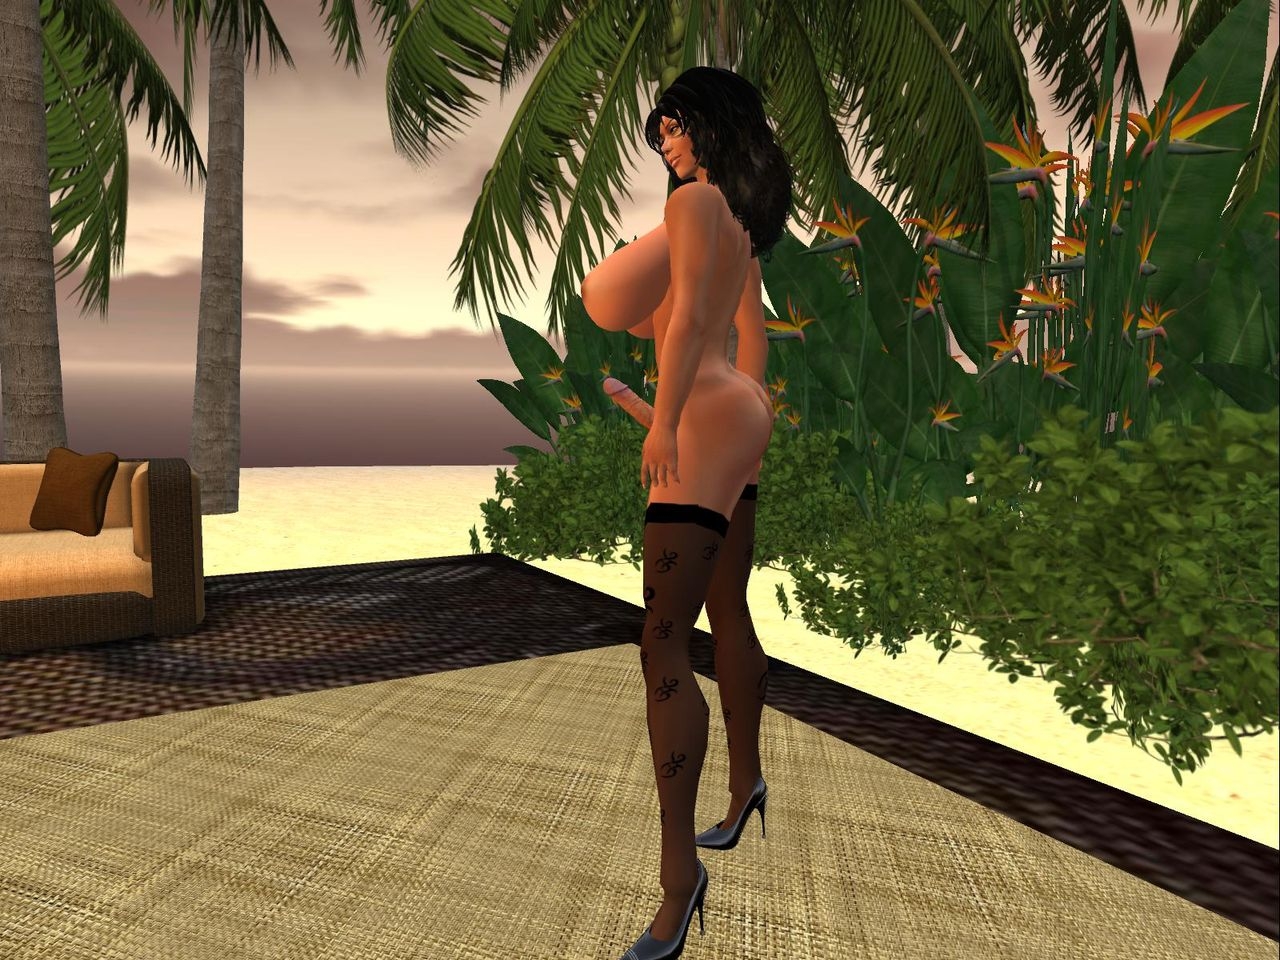 Shemale Luvi poses in Second Life 17